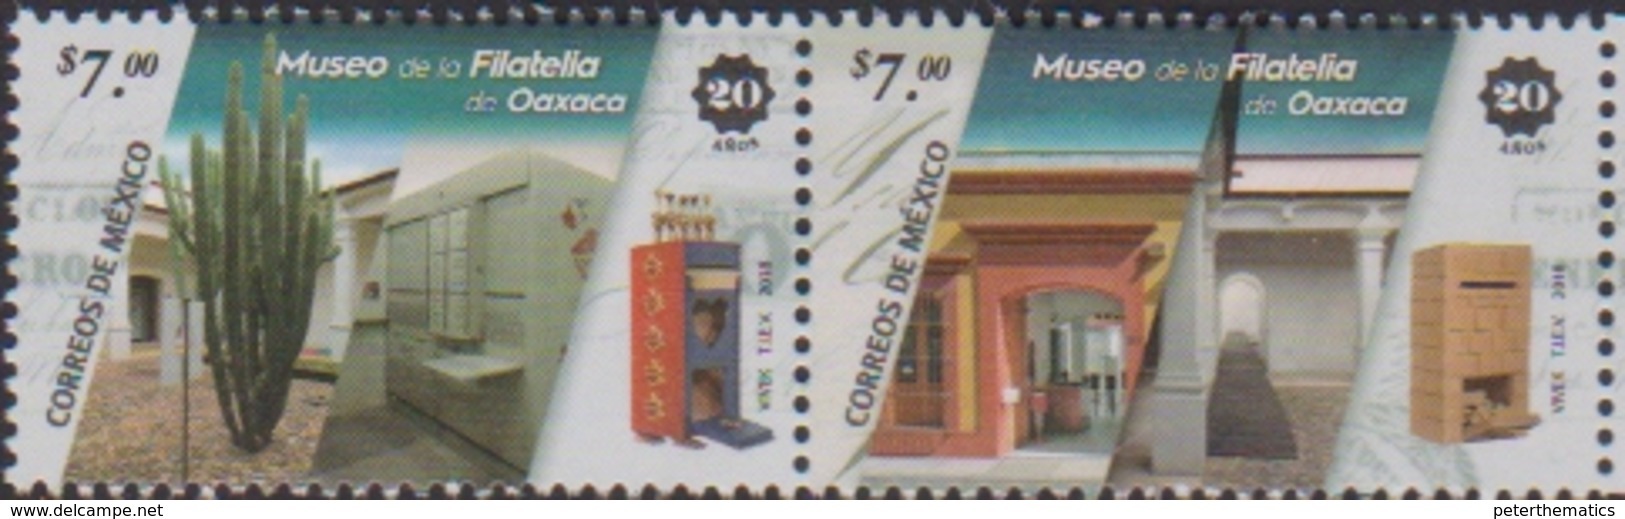 MEXICO, 2018, MNH,MUSEUMS, MUSEUM OF PHILATELY, CACTUS,  2v - Museums